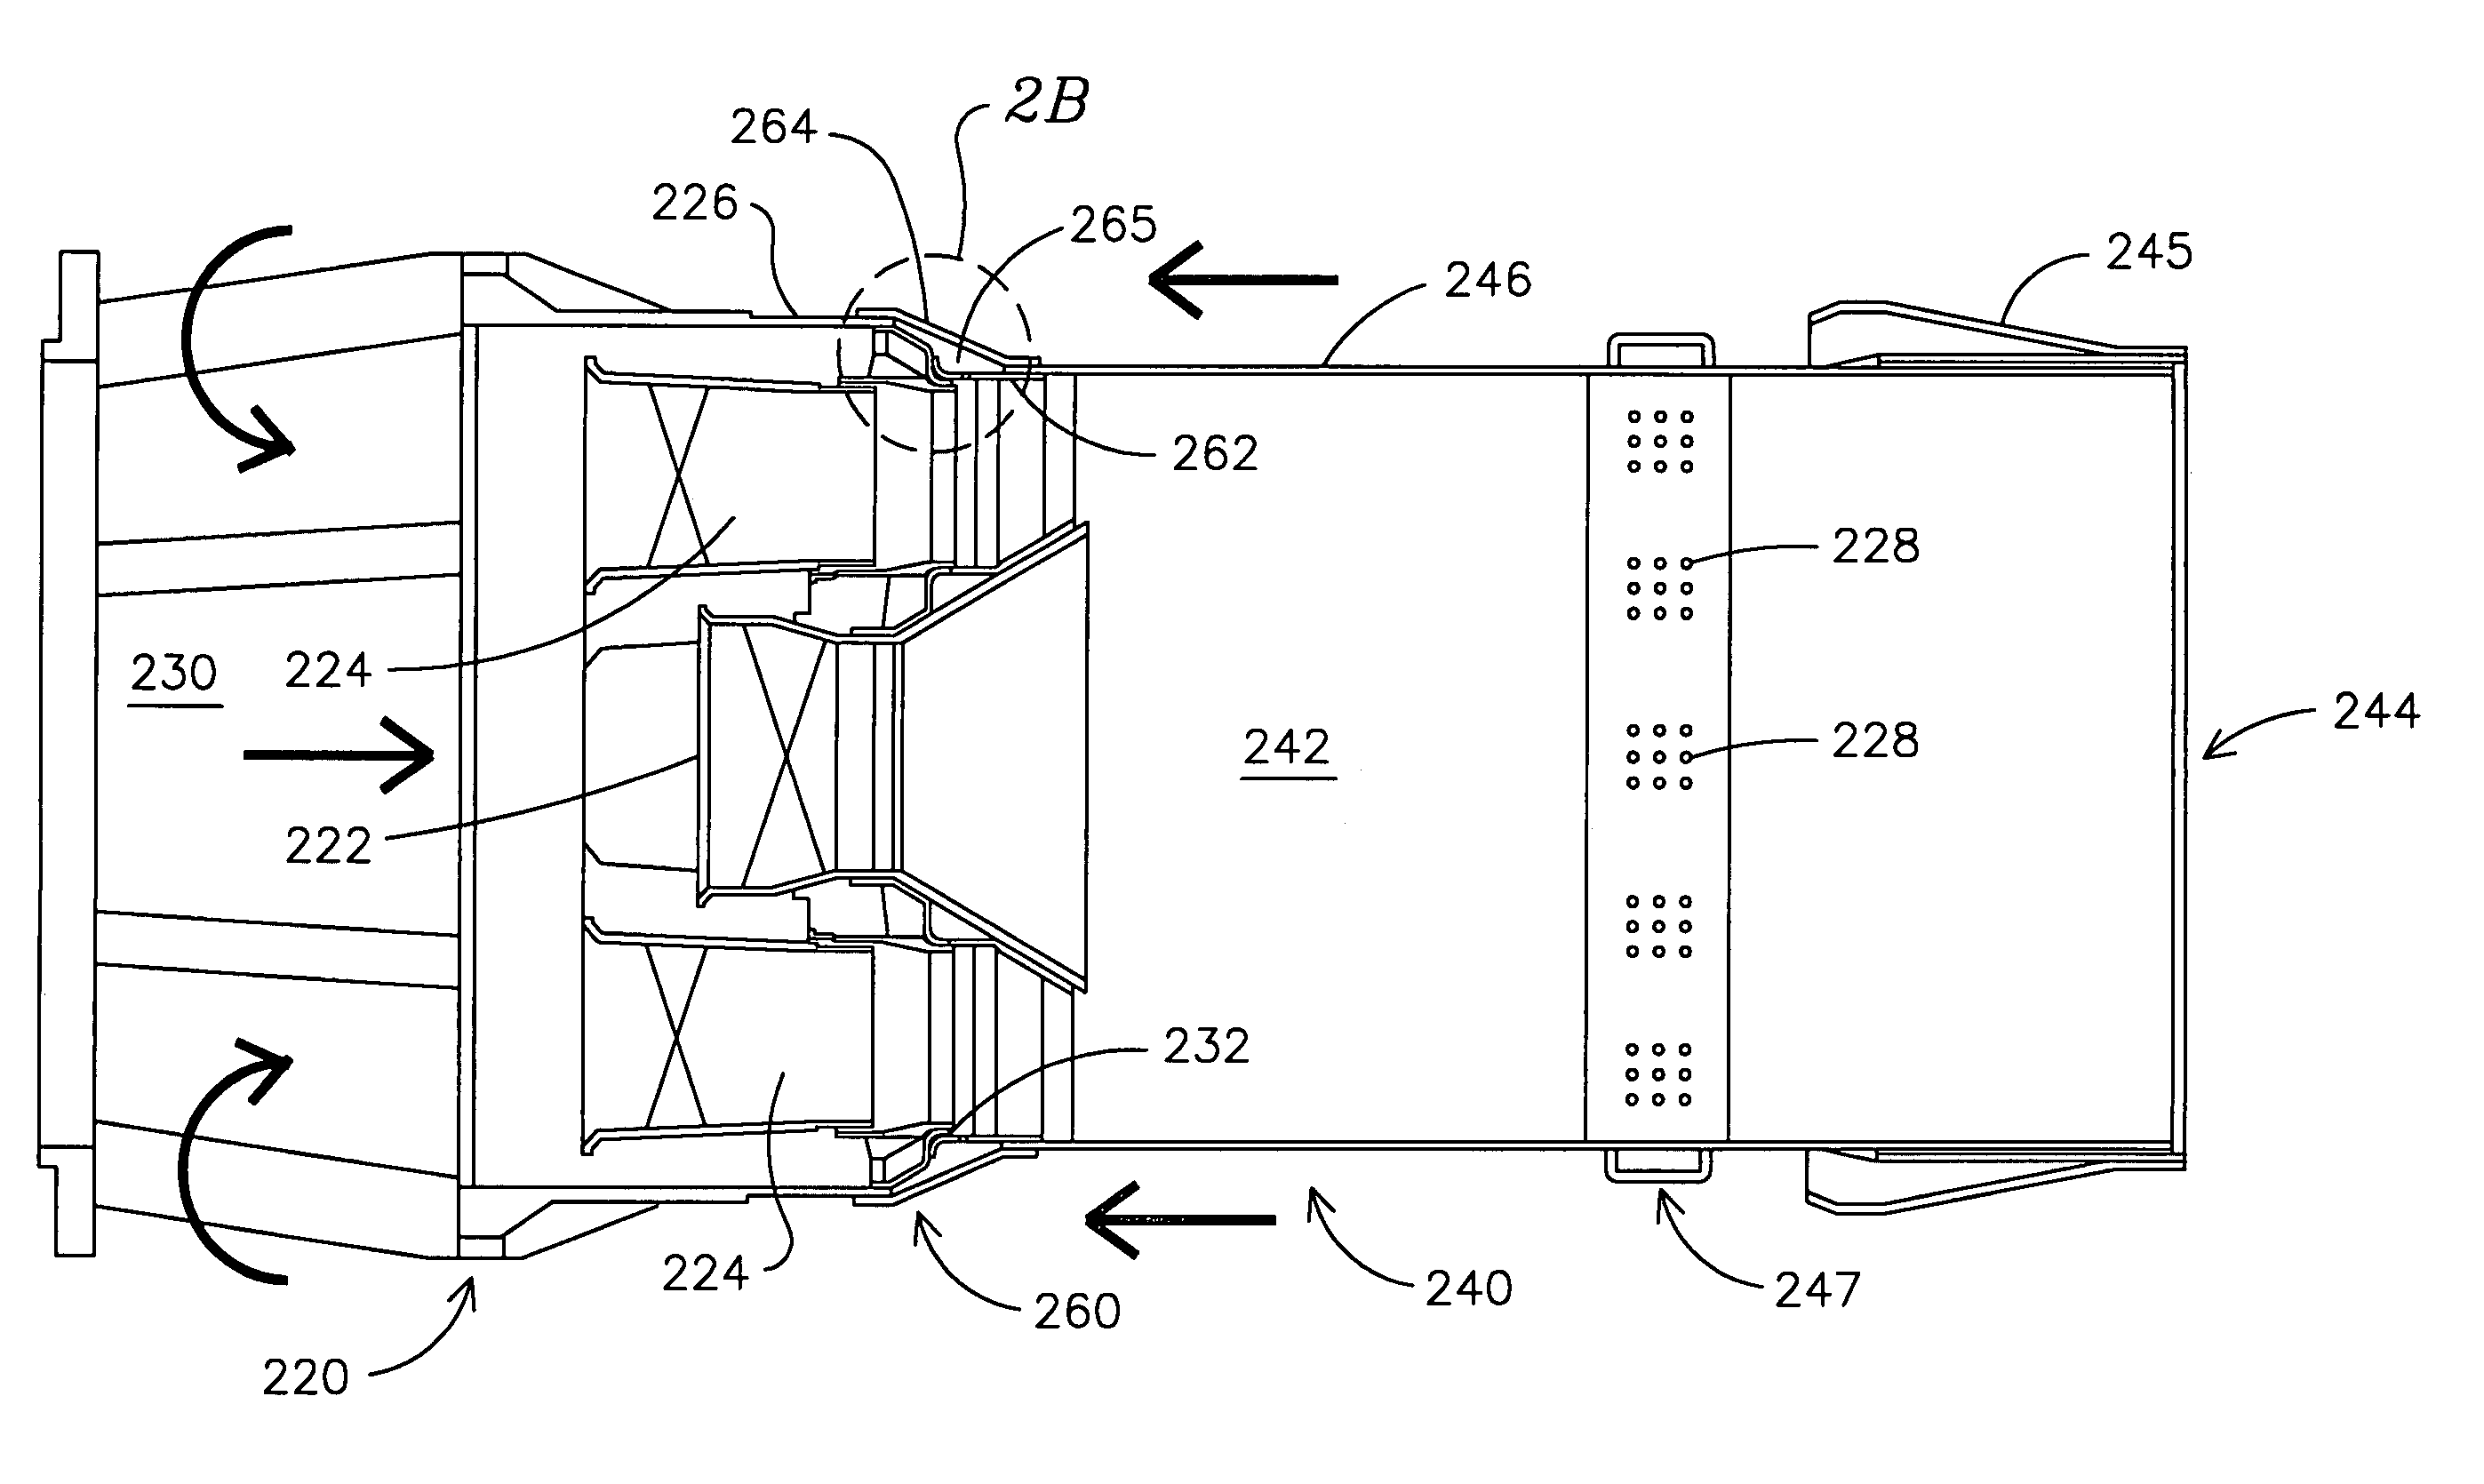 Resonator device at junction of combustor and combustion chamber